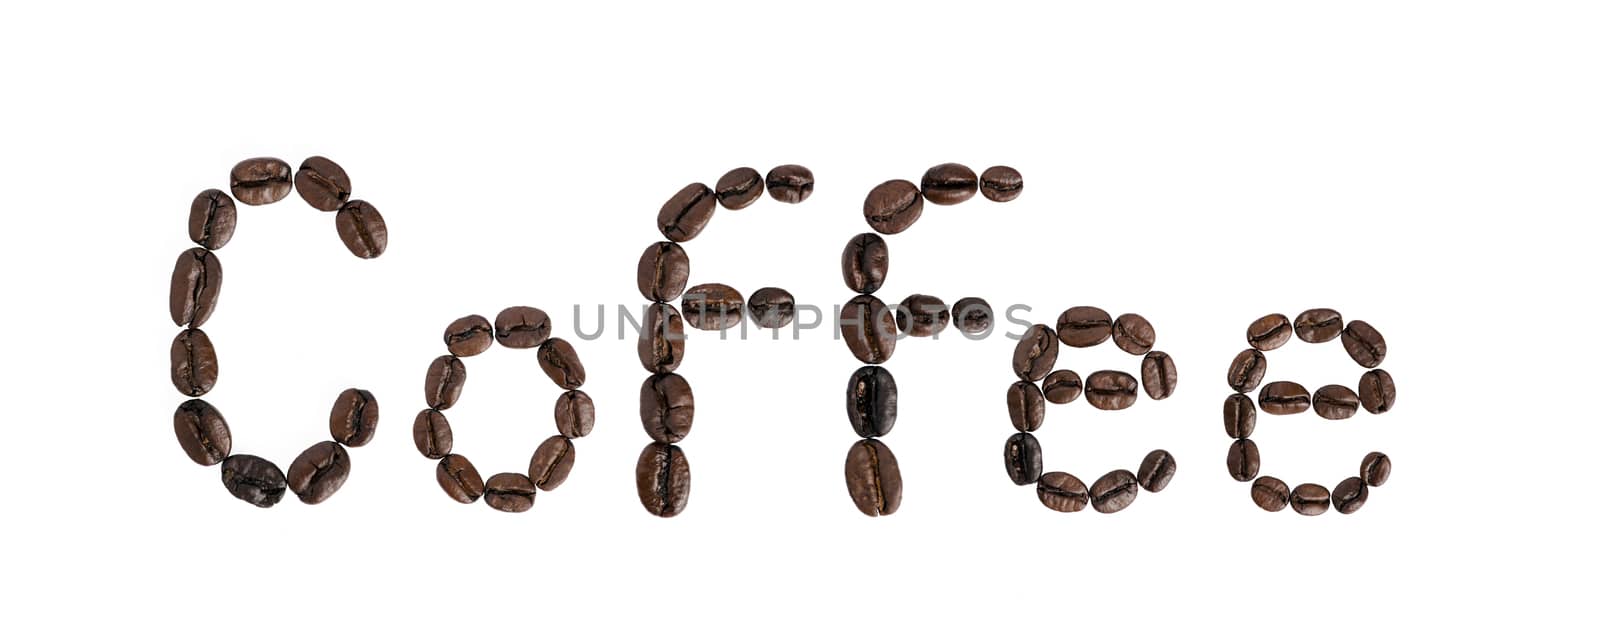 Word coffee made of coffee beans isolated on whtie background.